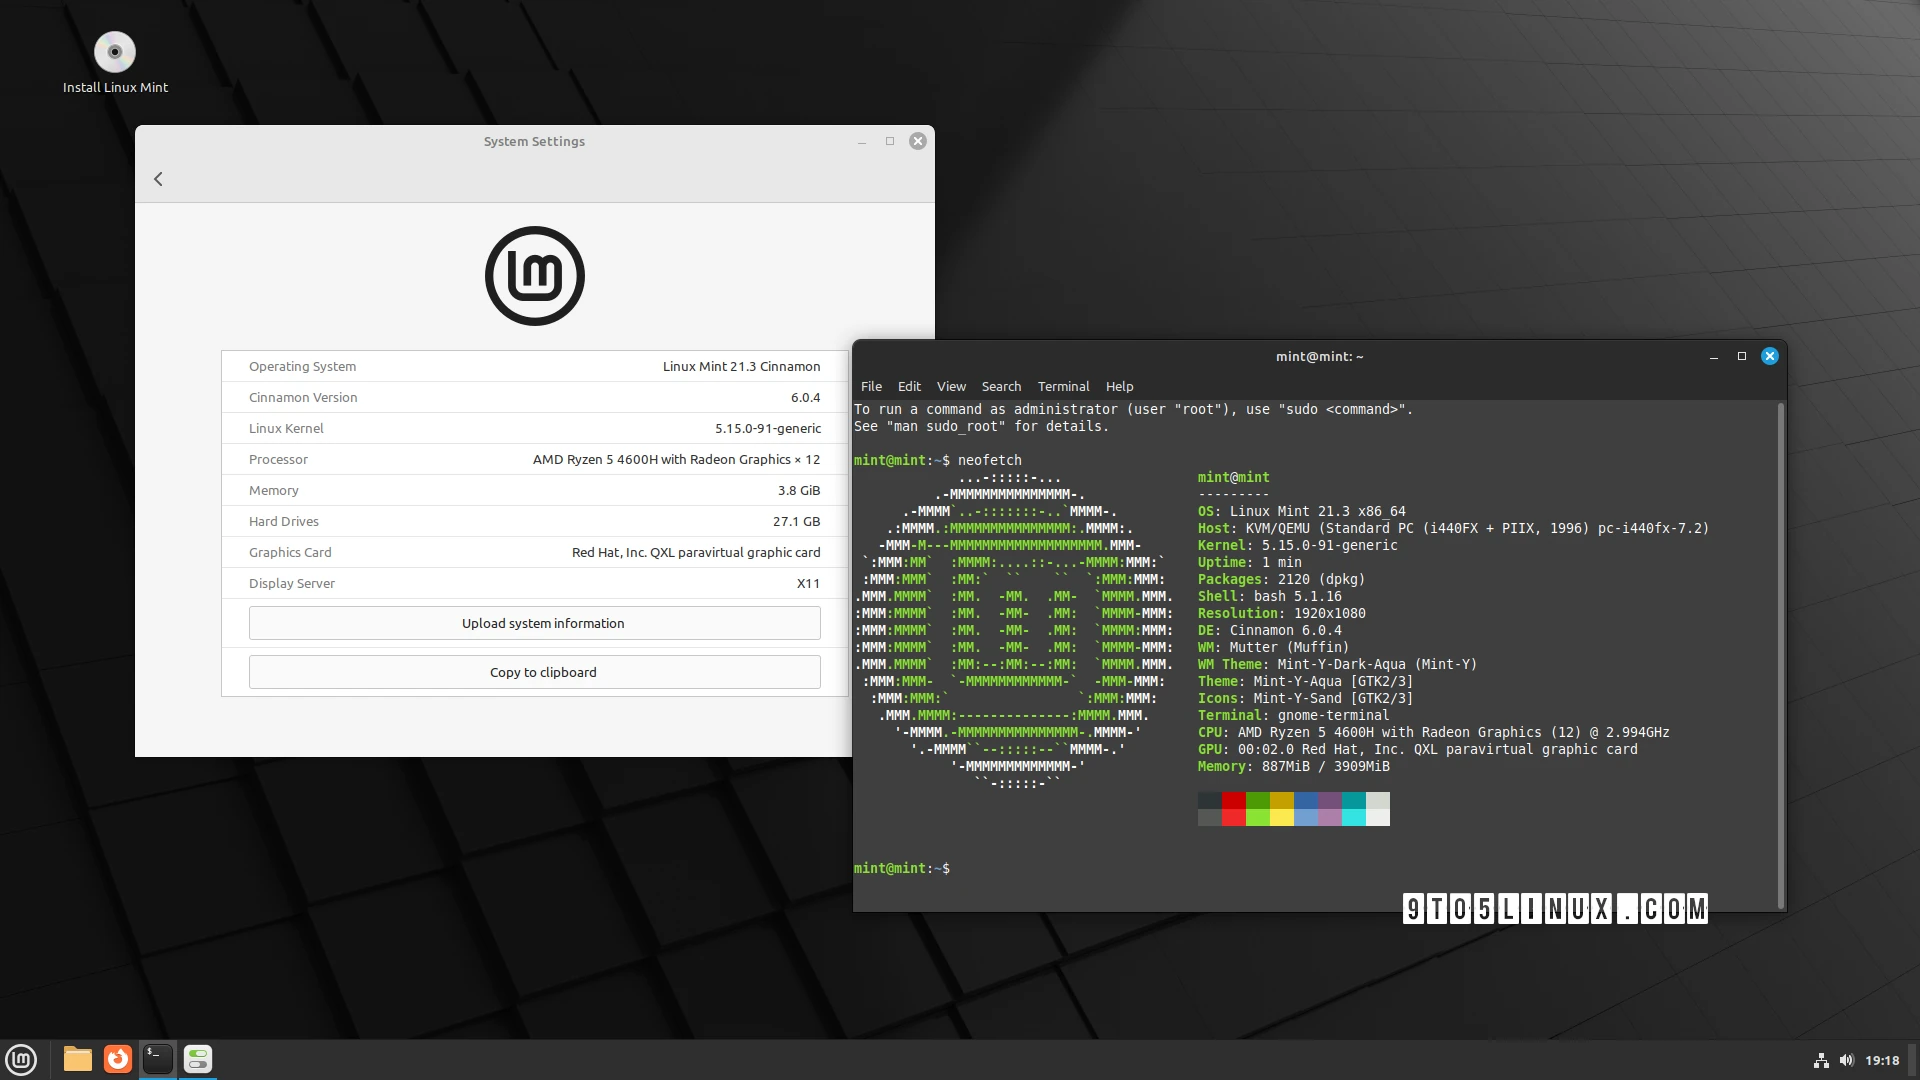 Linux Mint 21.3 “Virginia” Is Now Available for Download, This Is What’s New